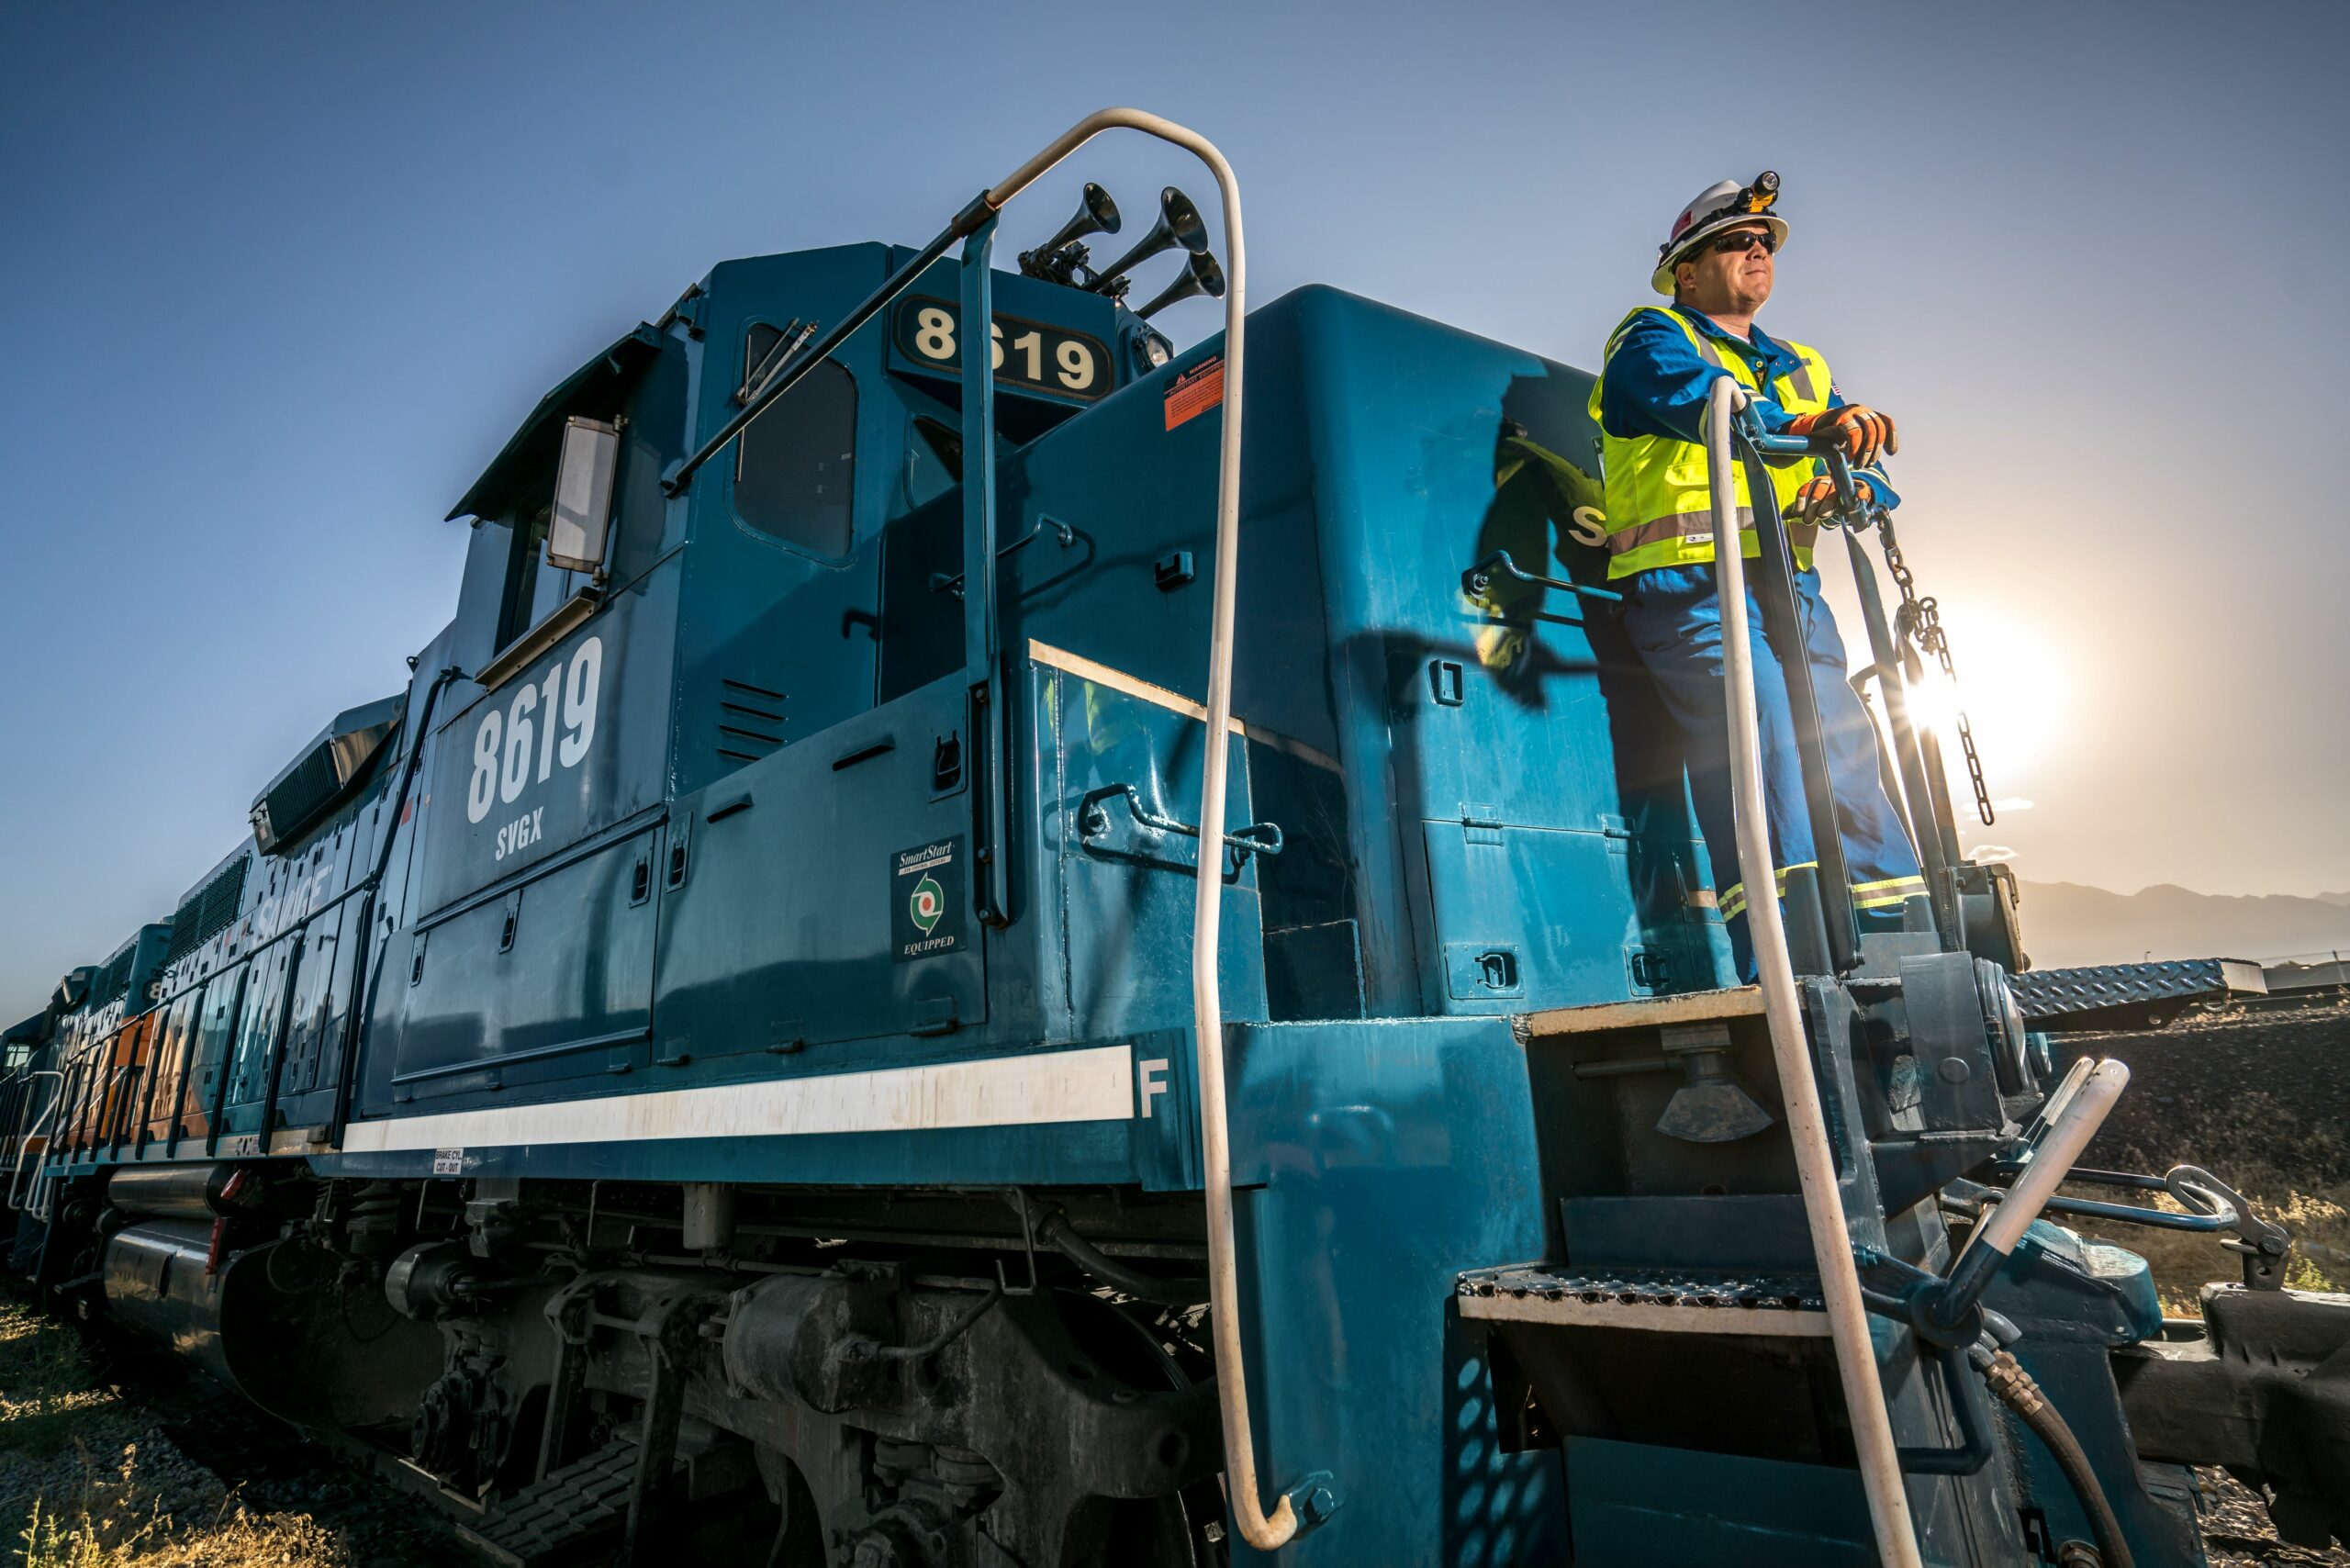 The Surface Transportation Board (STB) has granted Savage Tooele Railroad Company (STR) the authority to build and operate approximately 11 miles of rail line in Tooele County, Utah, including the rehabilitation of existing track.